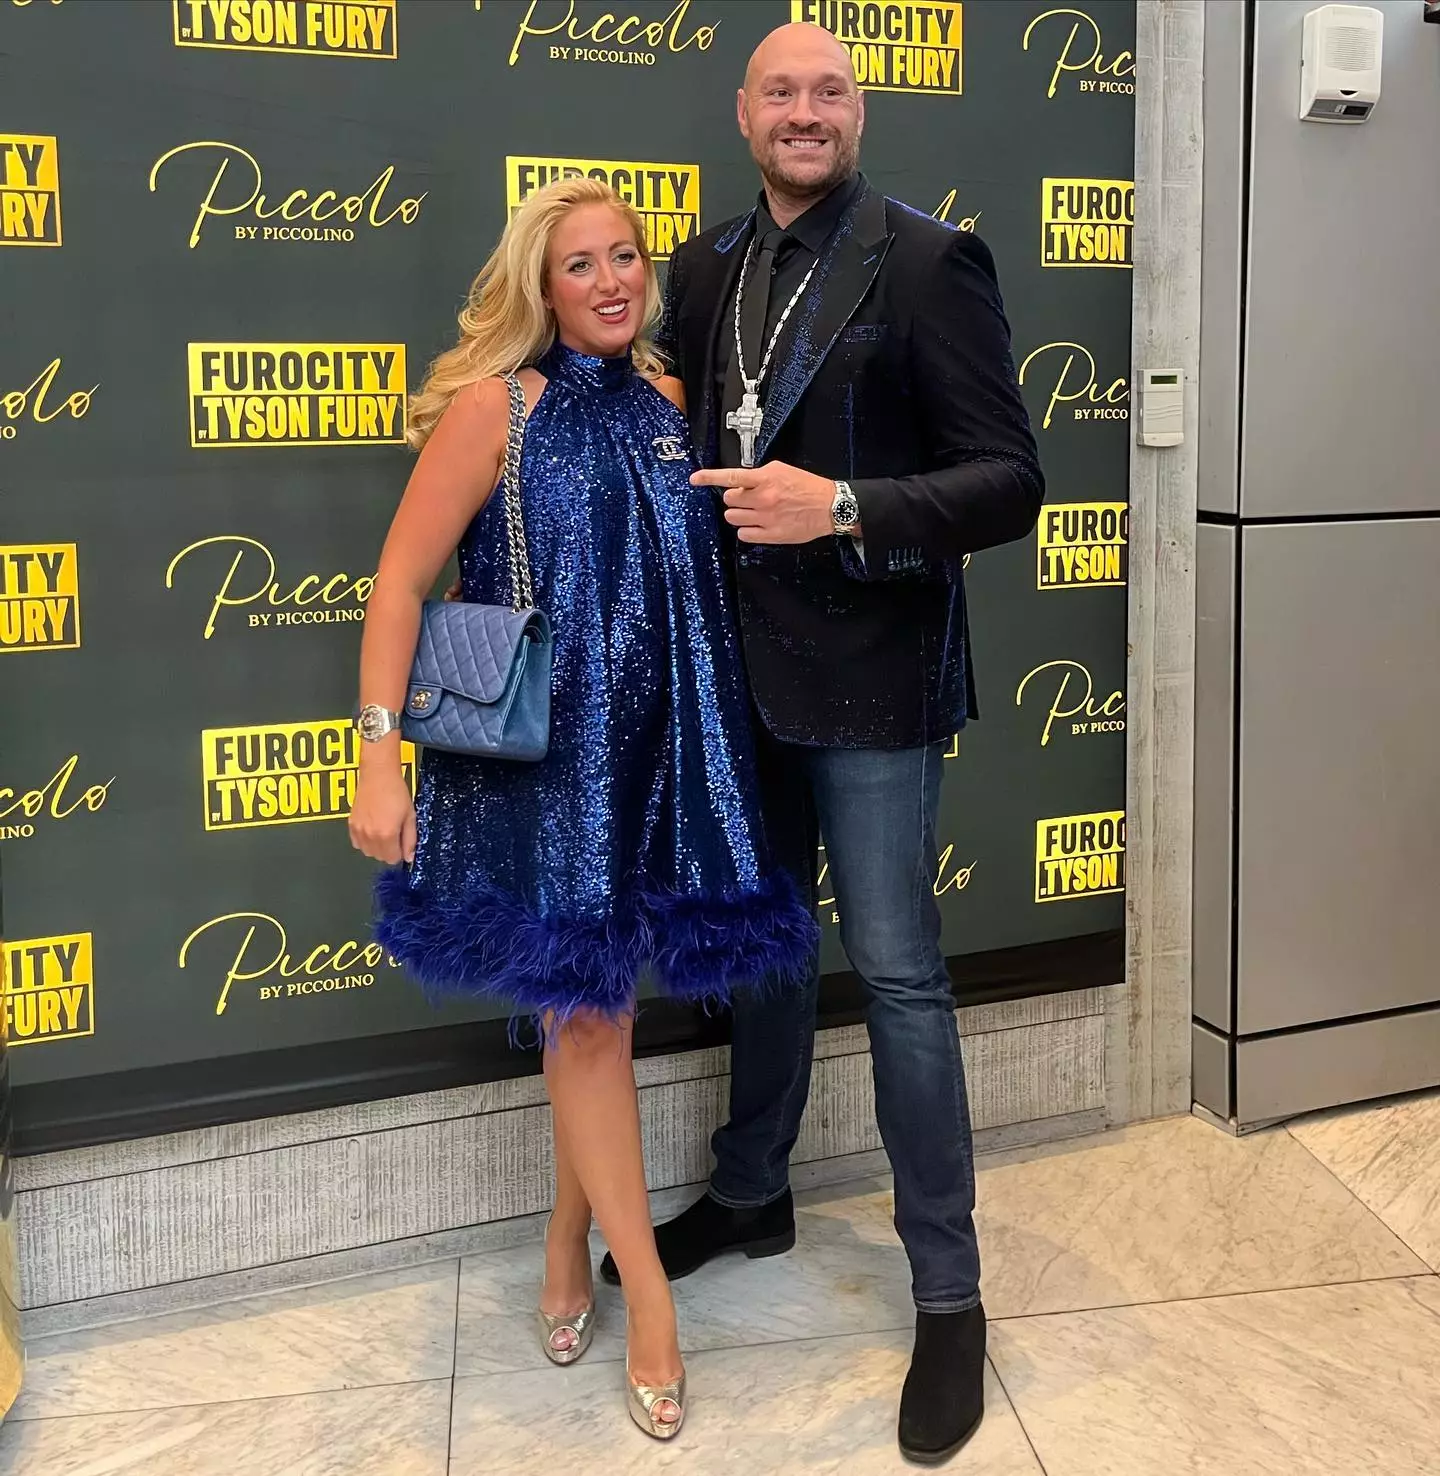 Paris and Tyson Fury are parents to seven kids.